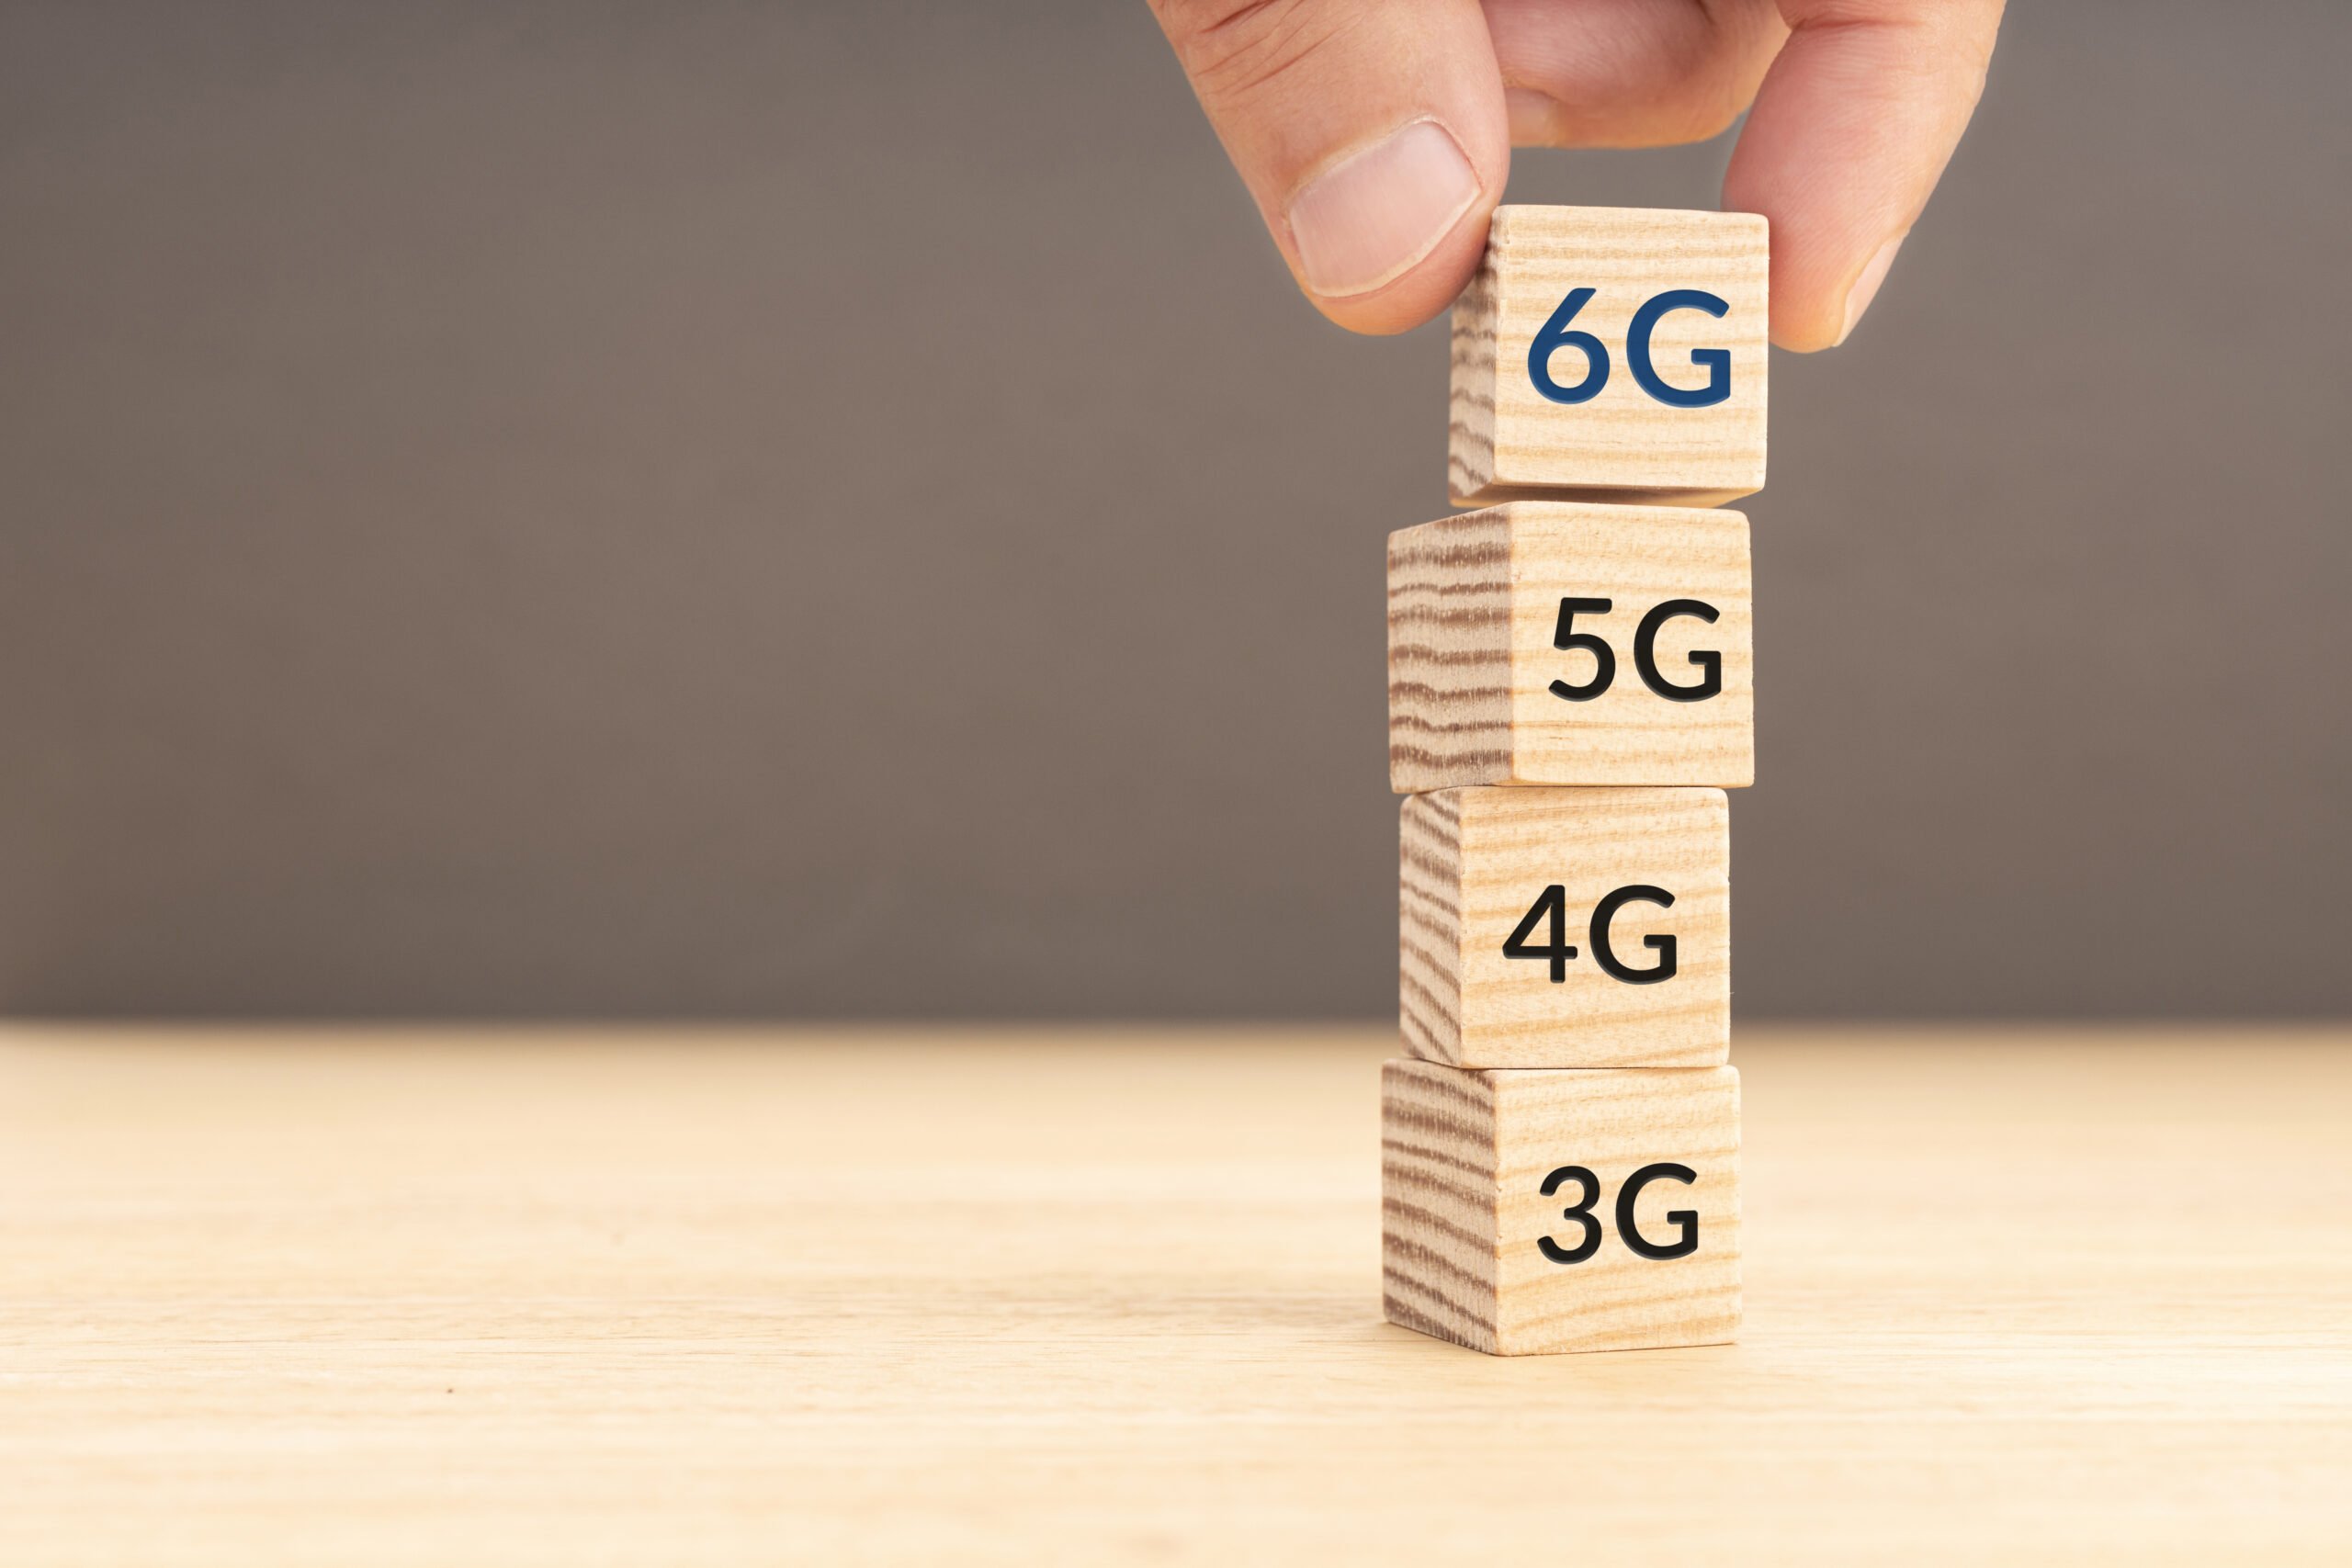 Expertise in the field of 5G and 6G